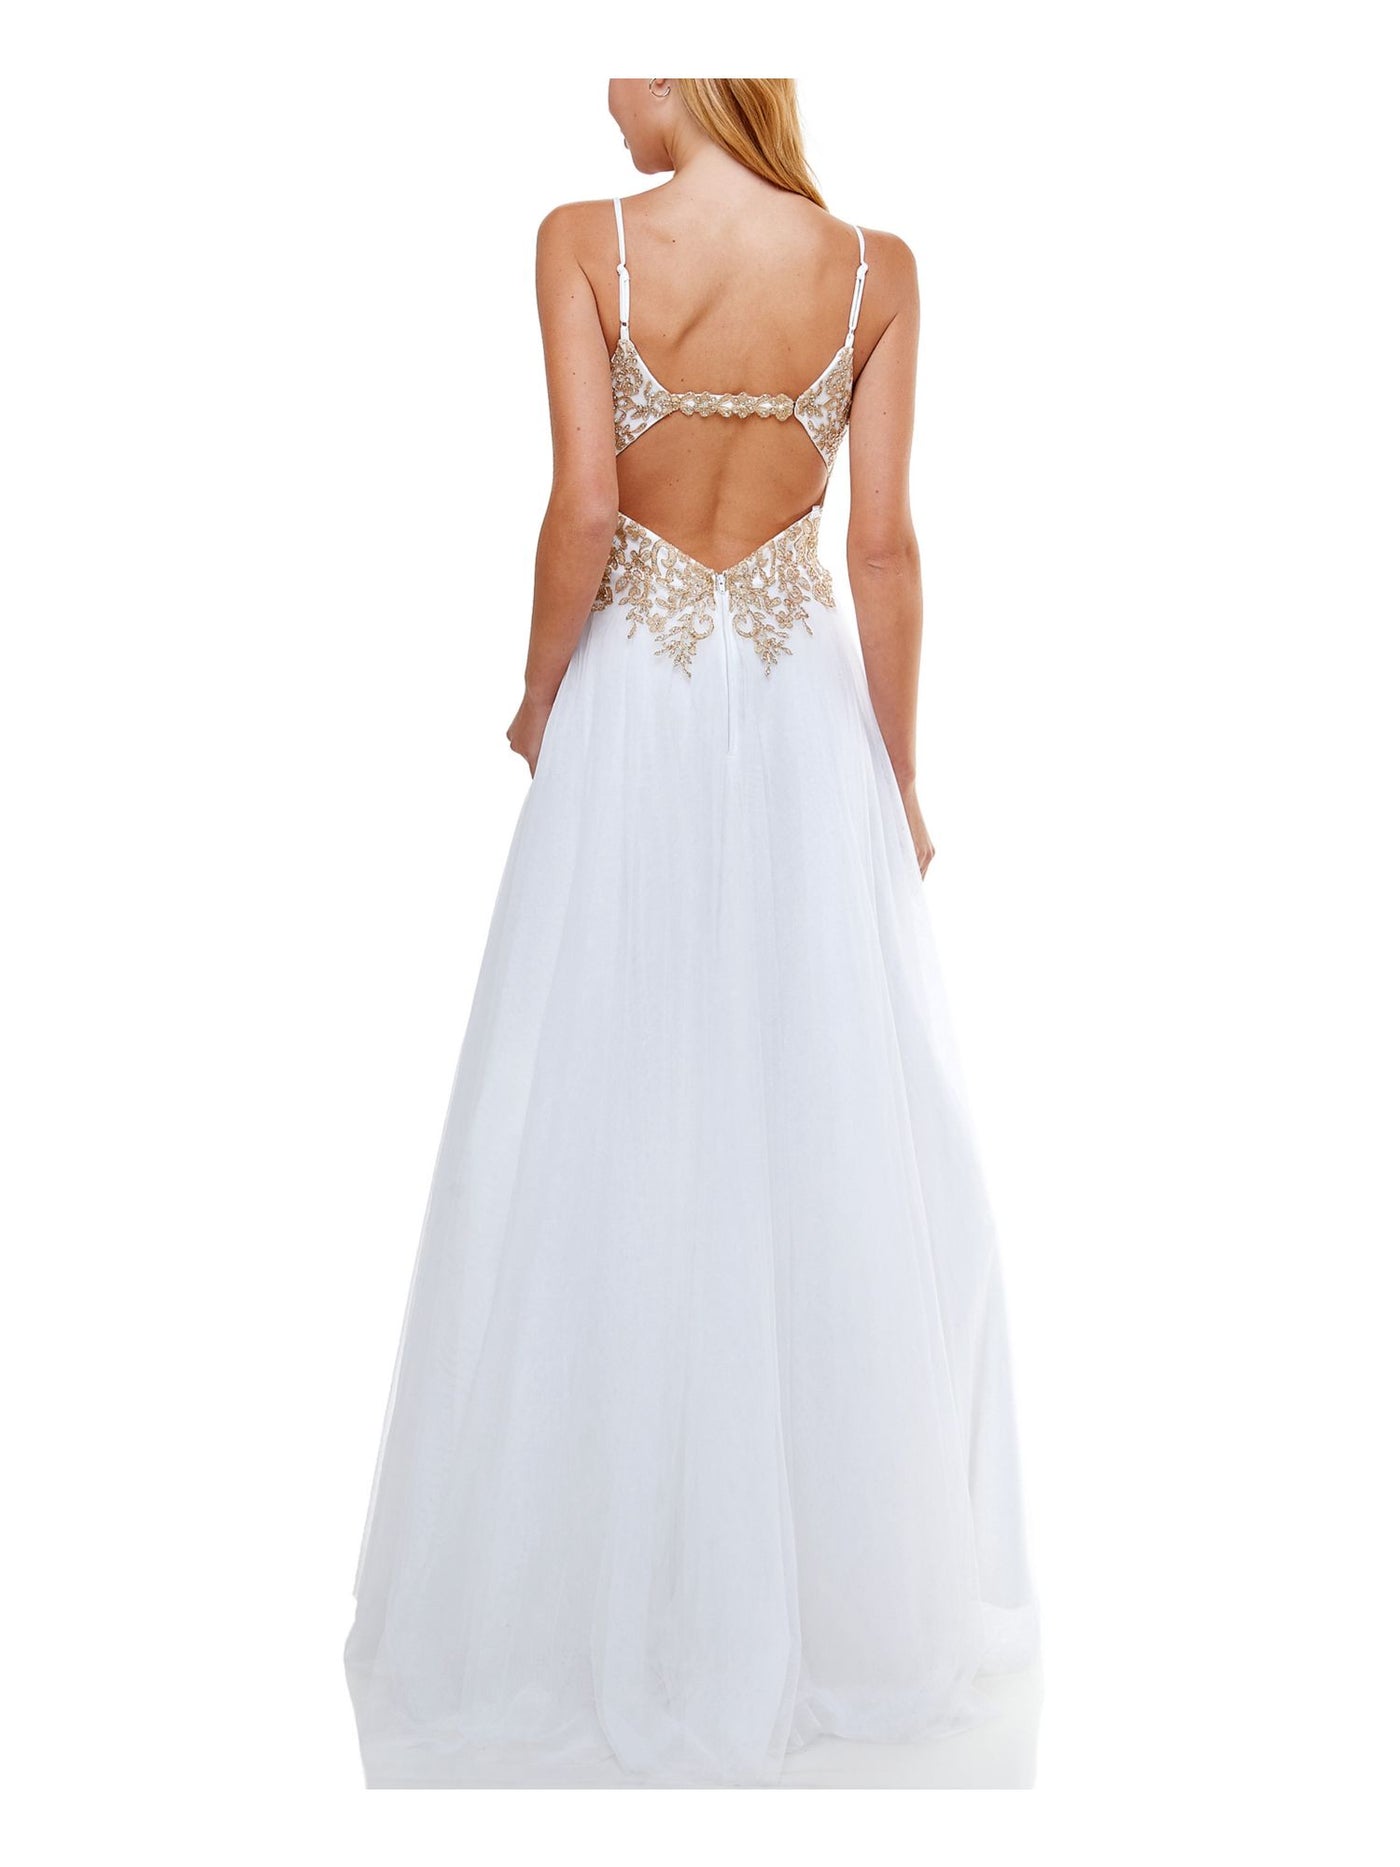 SAY YES TO THE DRESS Womens White Embellished Spaghetti Strap Sweetheart Neckline Full-Length Prom Fit + Flare Dress 7